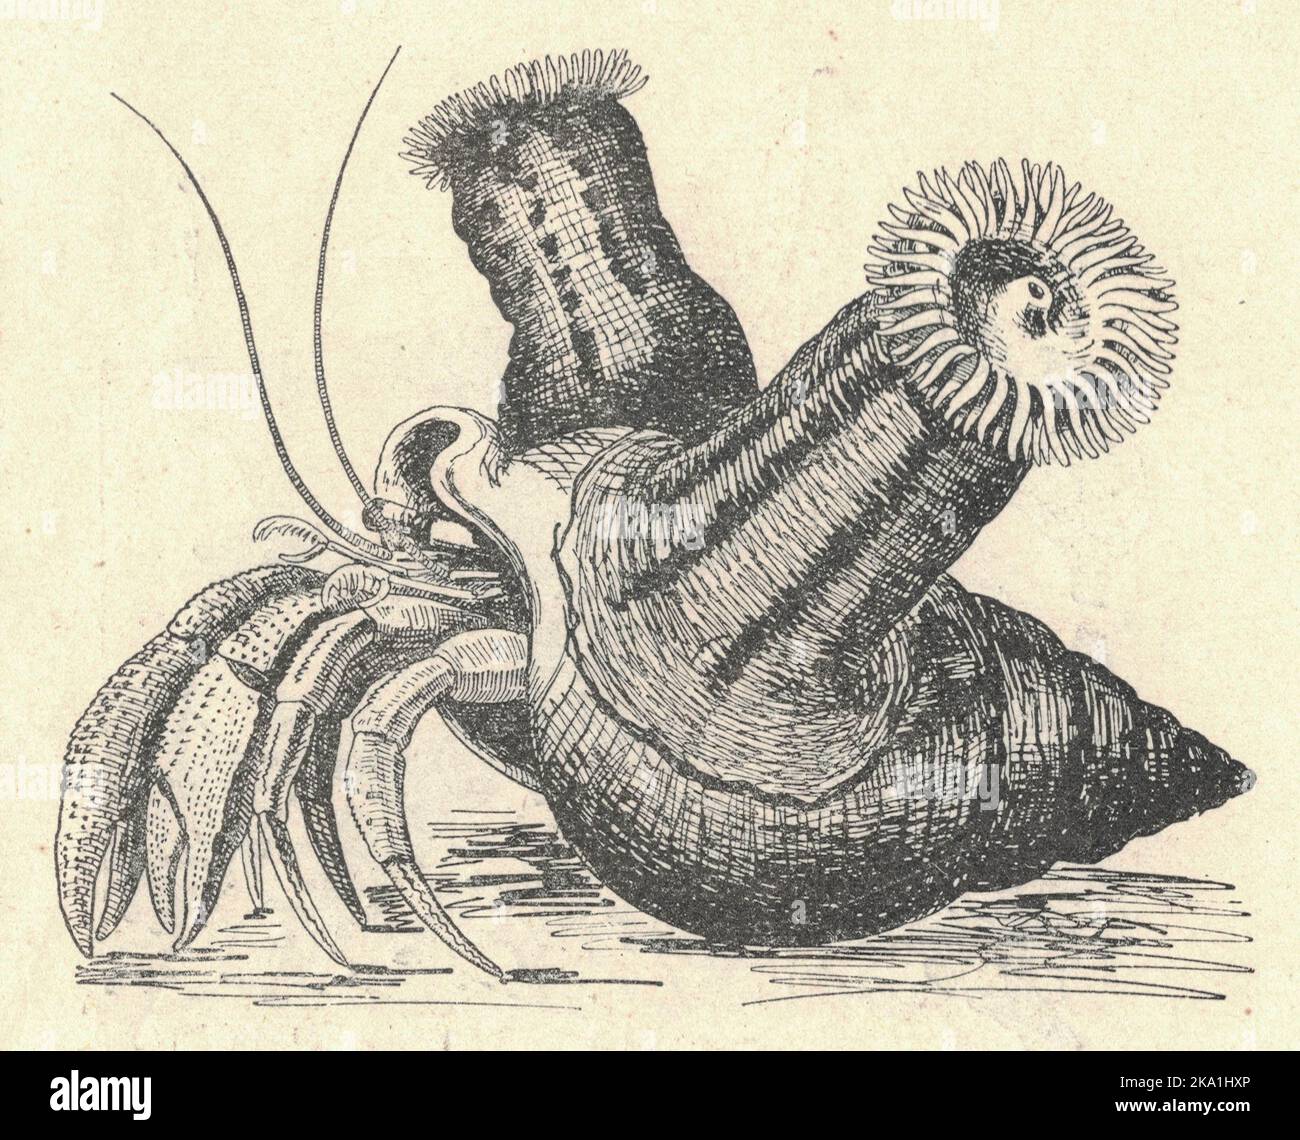 Symbiosis of a crayfish with a sea anemone. Vintage illustration of sea anemone. Old engraved picture of a sea anemone lives on shell. Book illustration published 1907. Adamsia palliata is a species of sea anemone in the family Hormathiidae. It is usually found growing on a gastropod shell inhabited by the hermit crab, Pagurus prideaux.[1] The anemone often completely envelops the shell and because of this it is commonly known as the cloak anemone or the hermit-crab anemone. Stock Photo